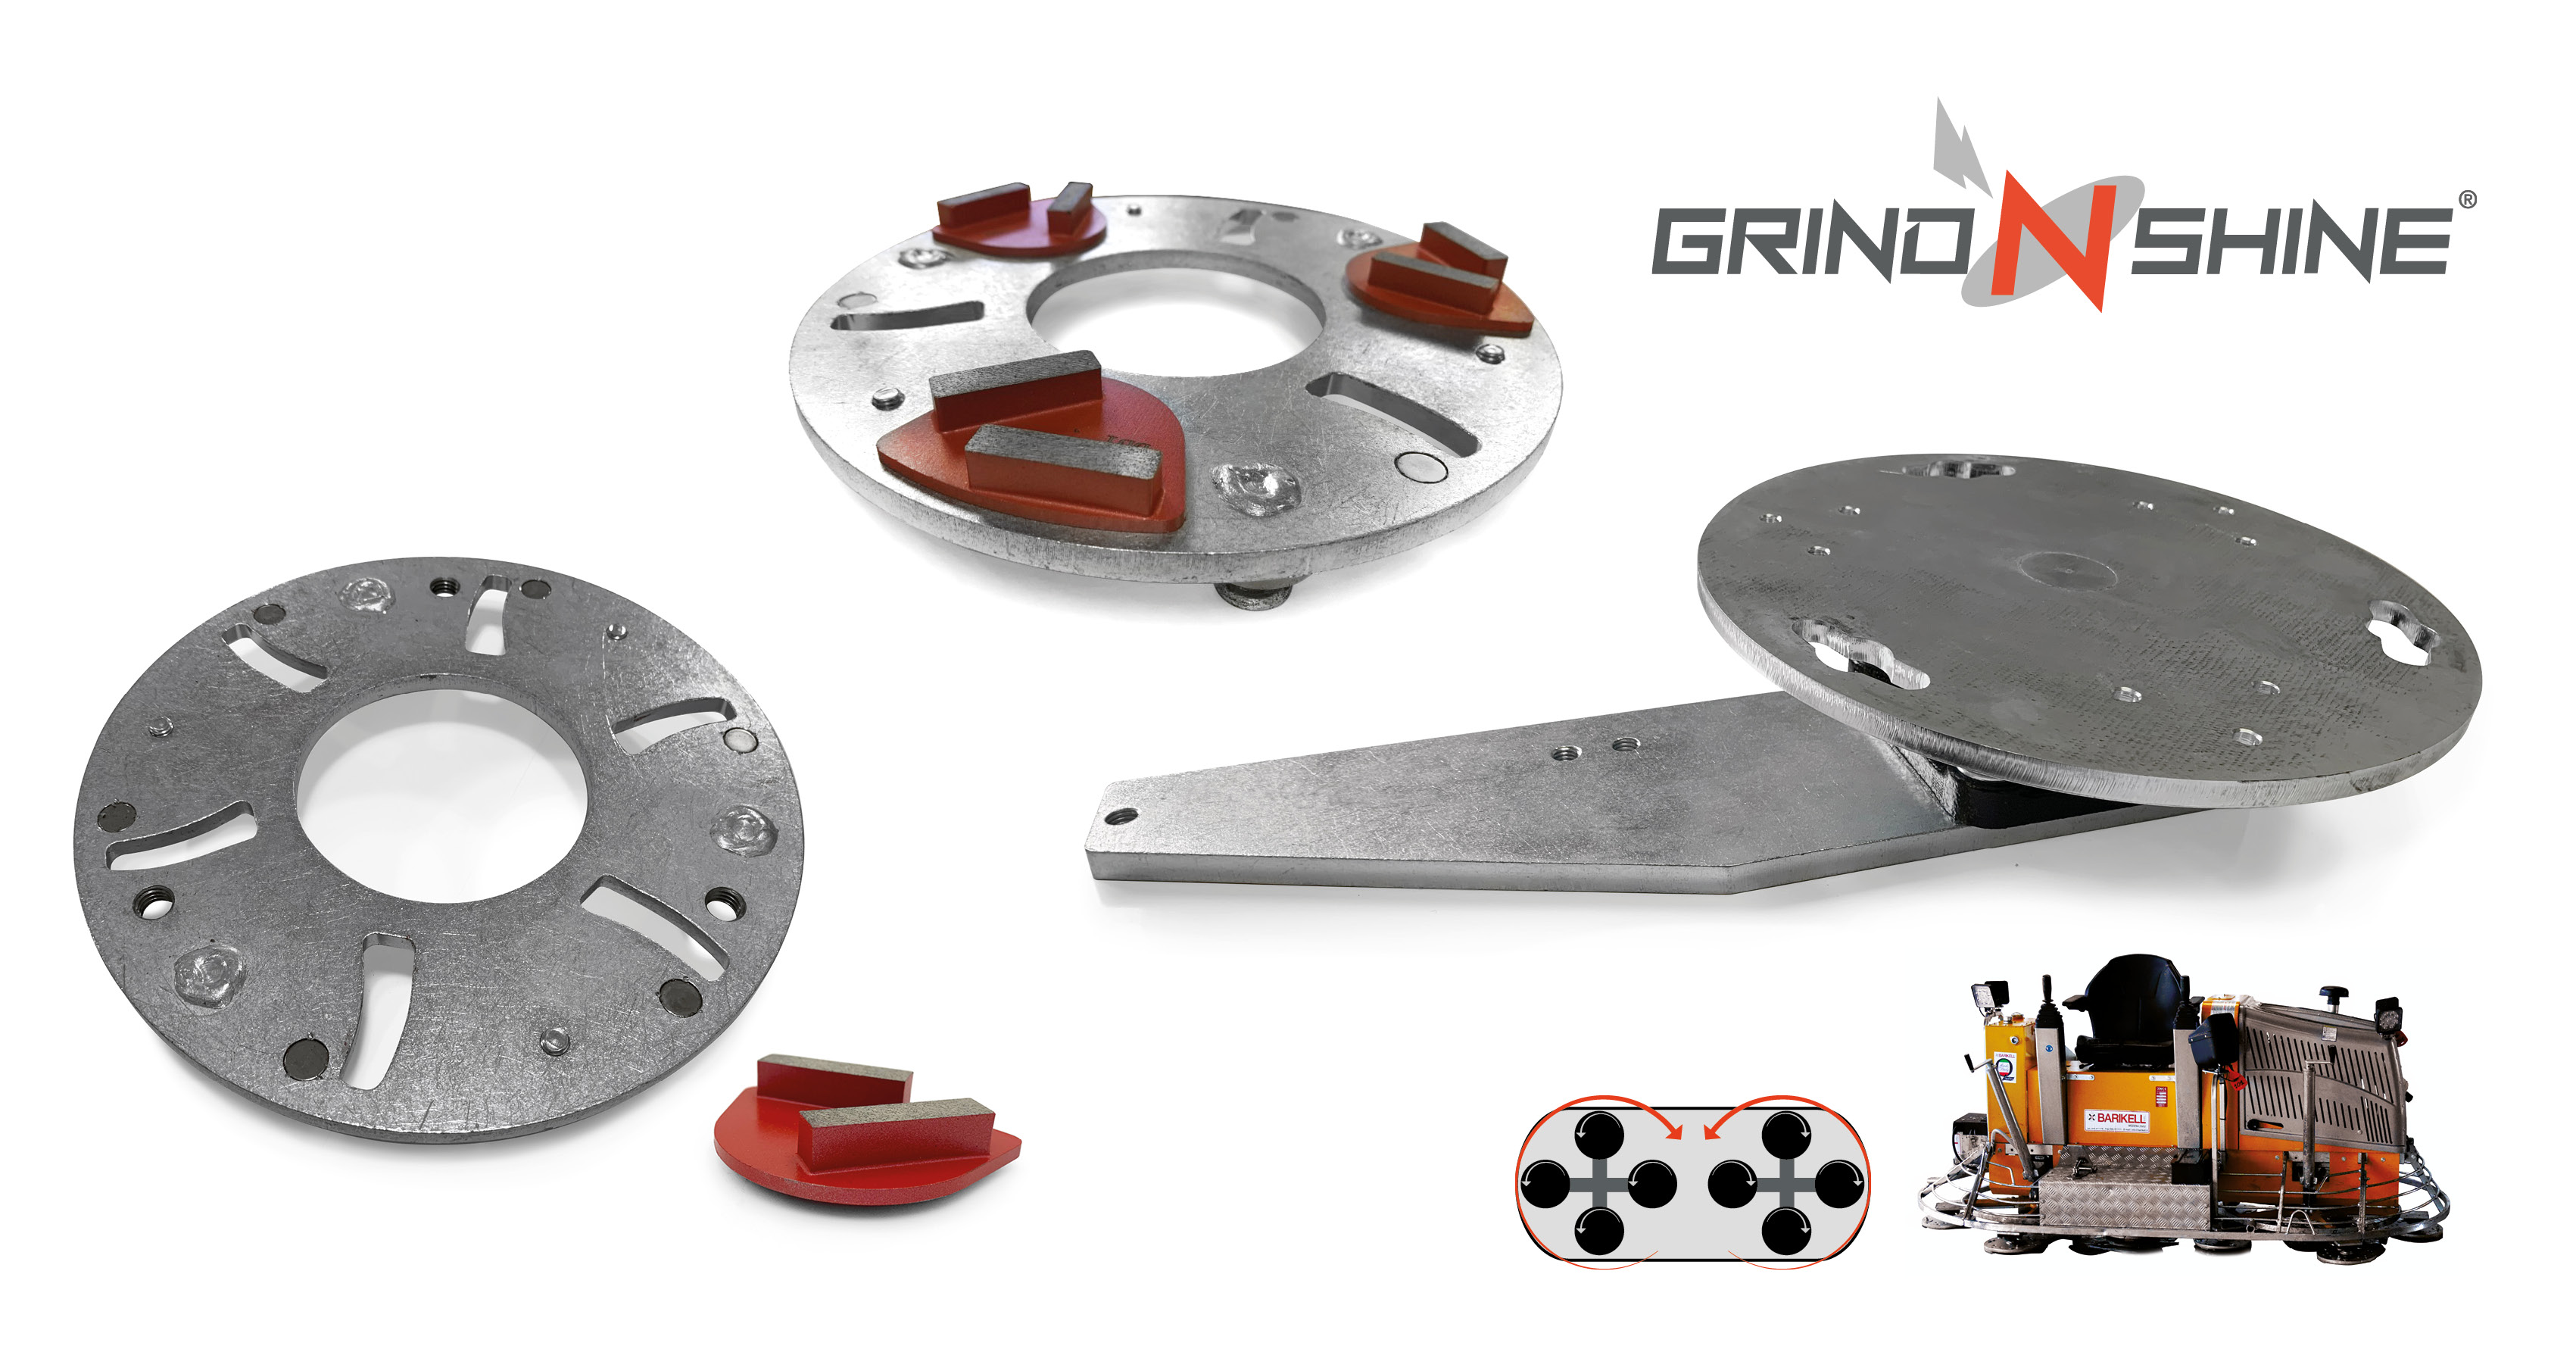 The concrete grinding disc holds the diamond grind pucks by magnetically holding into place. This tooling can be connected to a ride-on power trowel as a hybrid tool. 